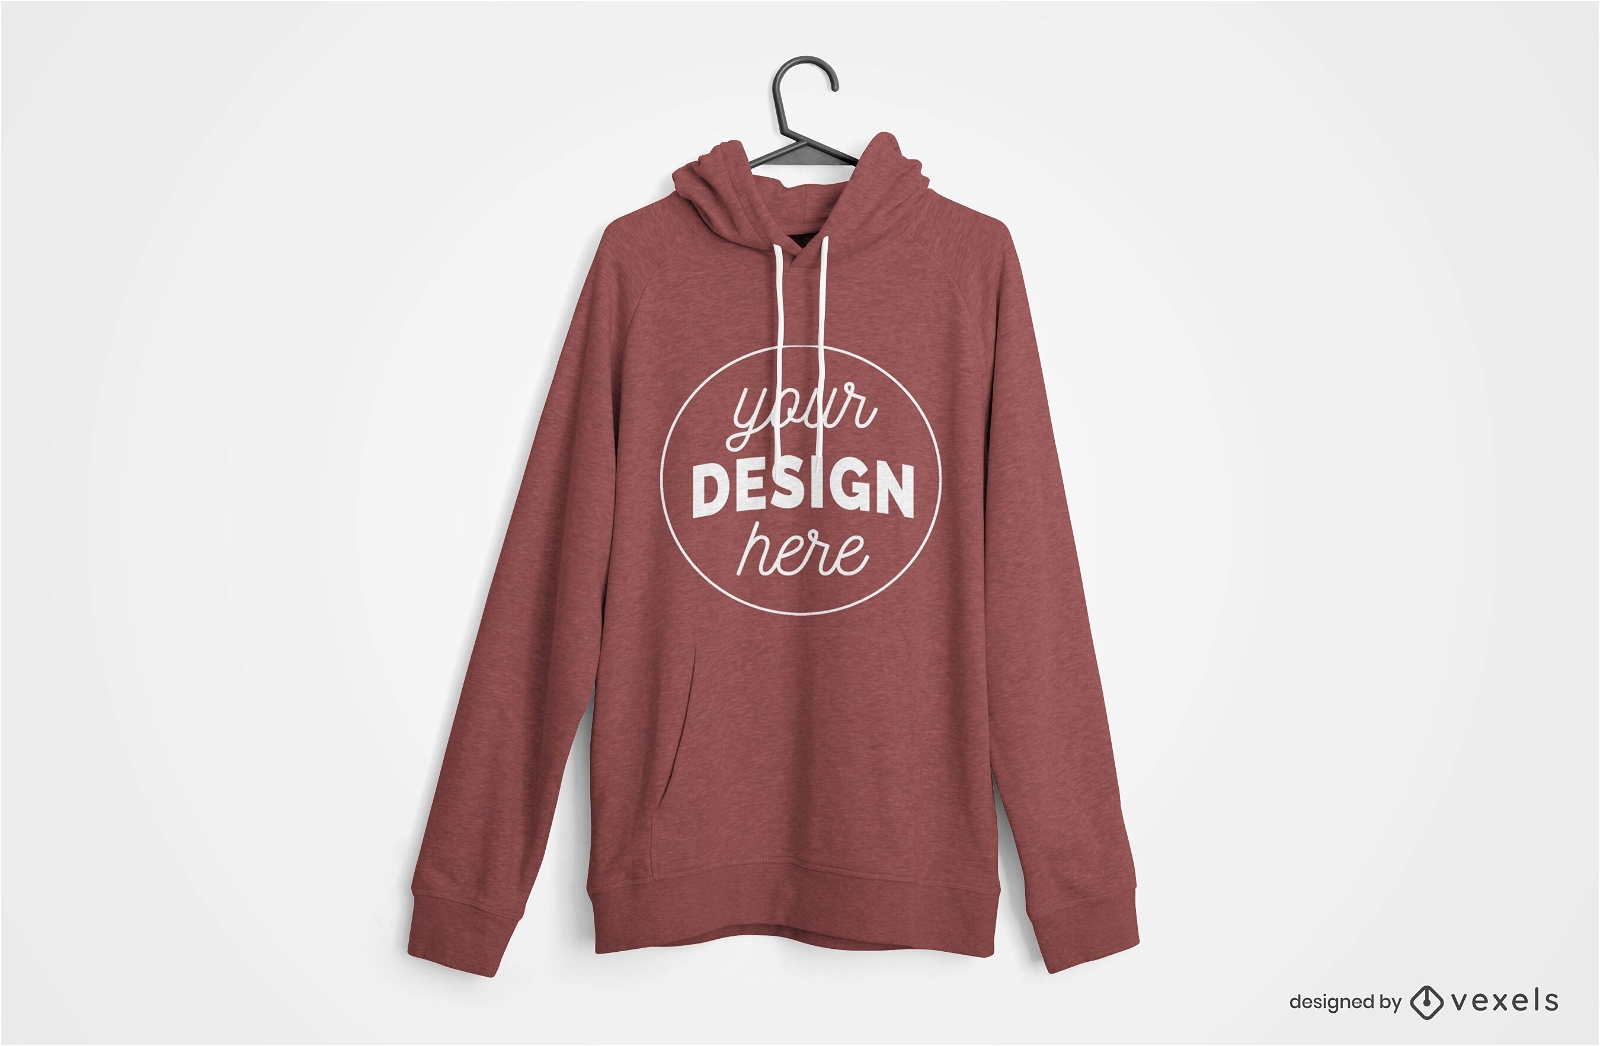 H?ngendes Hoodie-Modelldesign